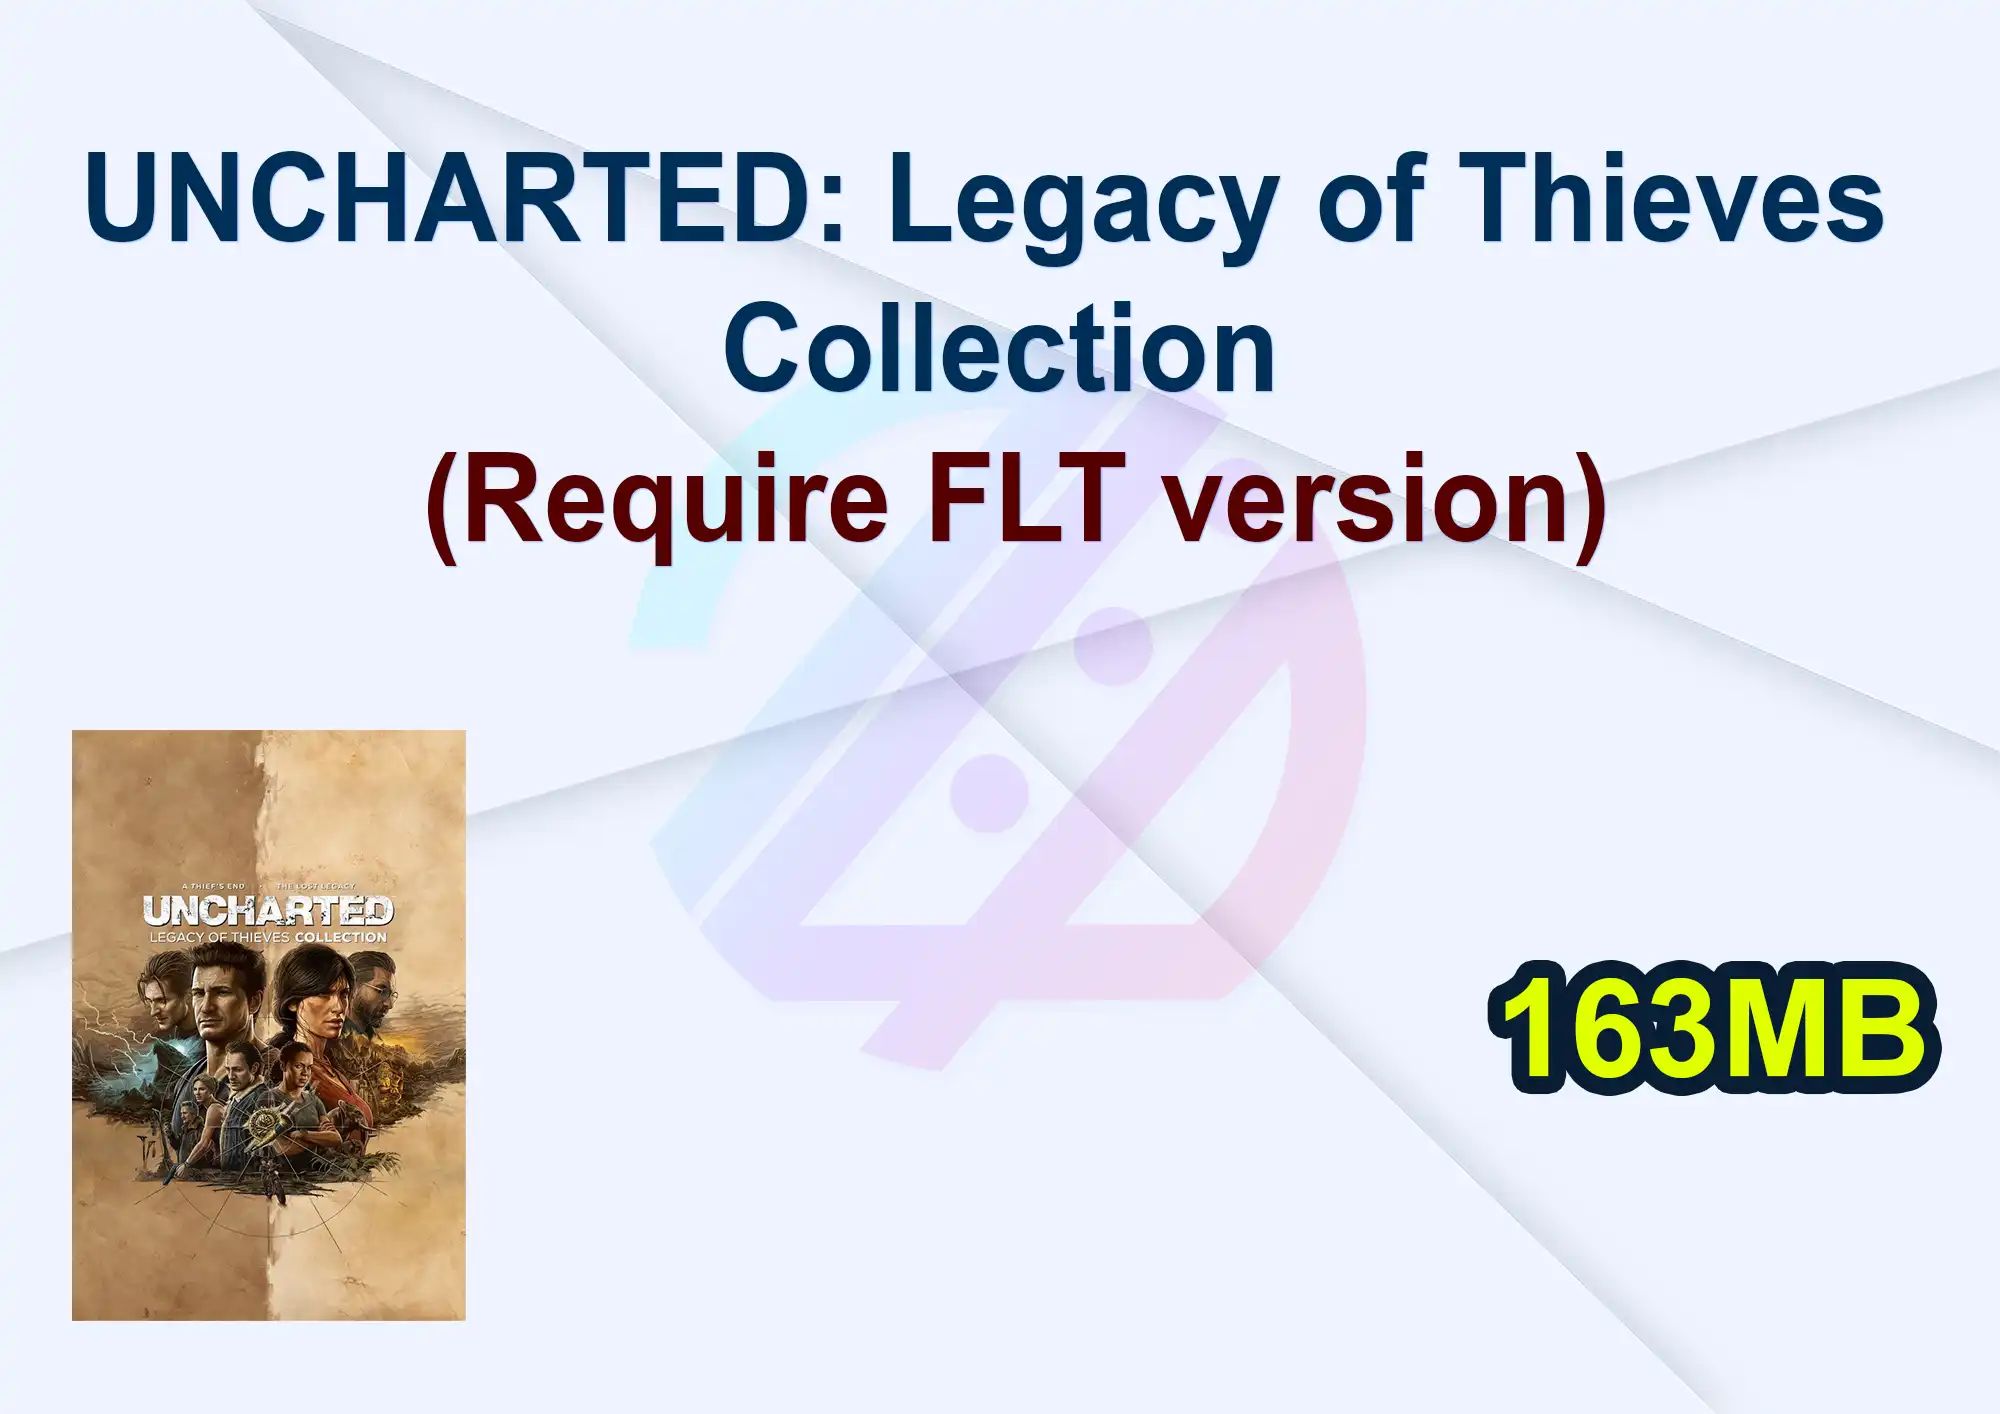 UNCHARTED: Legacy of Thieves Collection (Require FLT version)